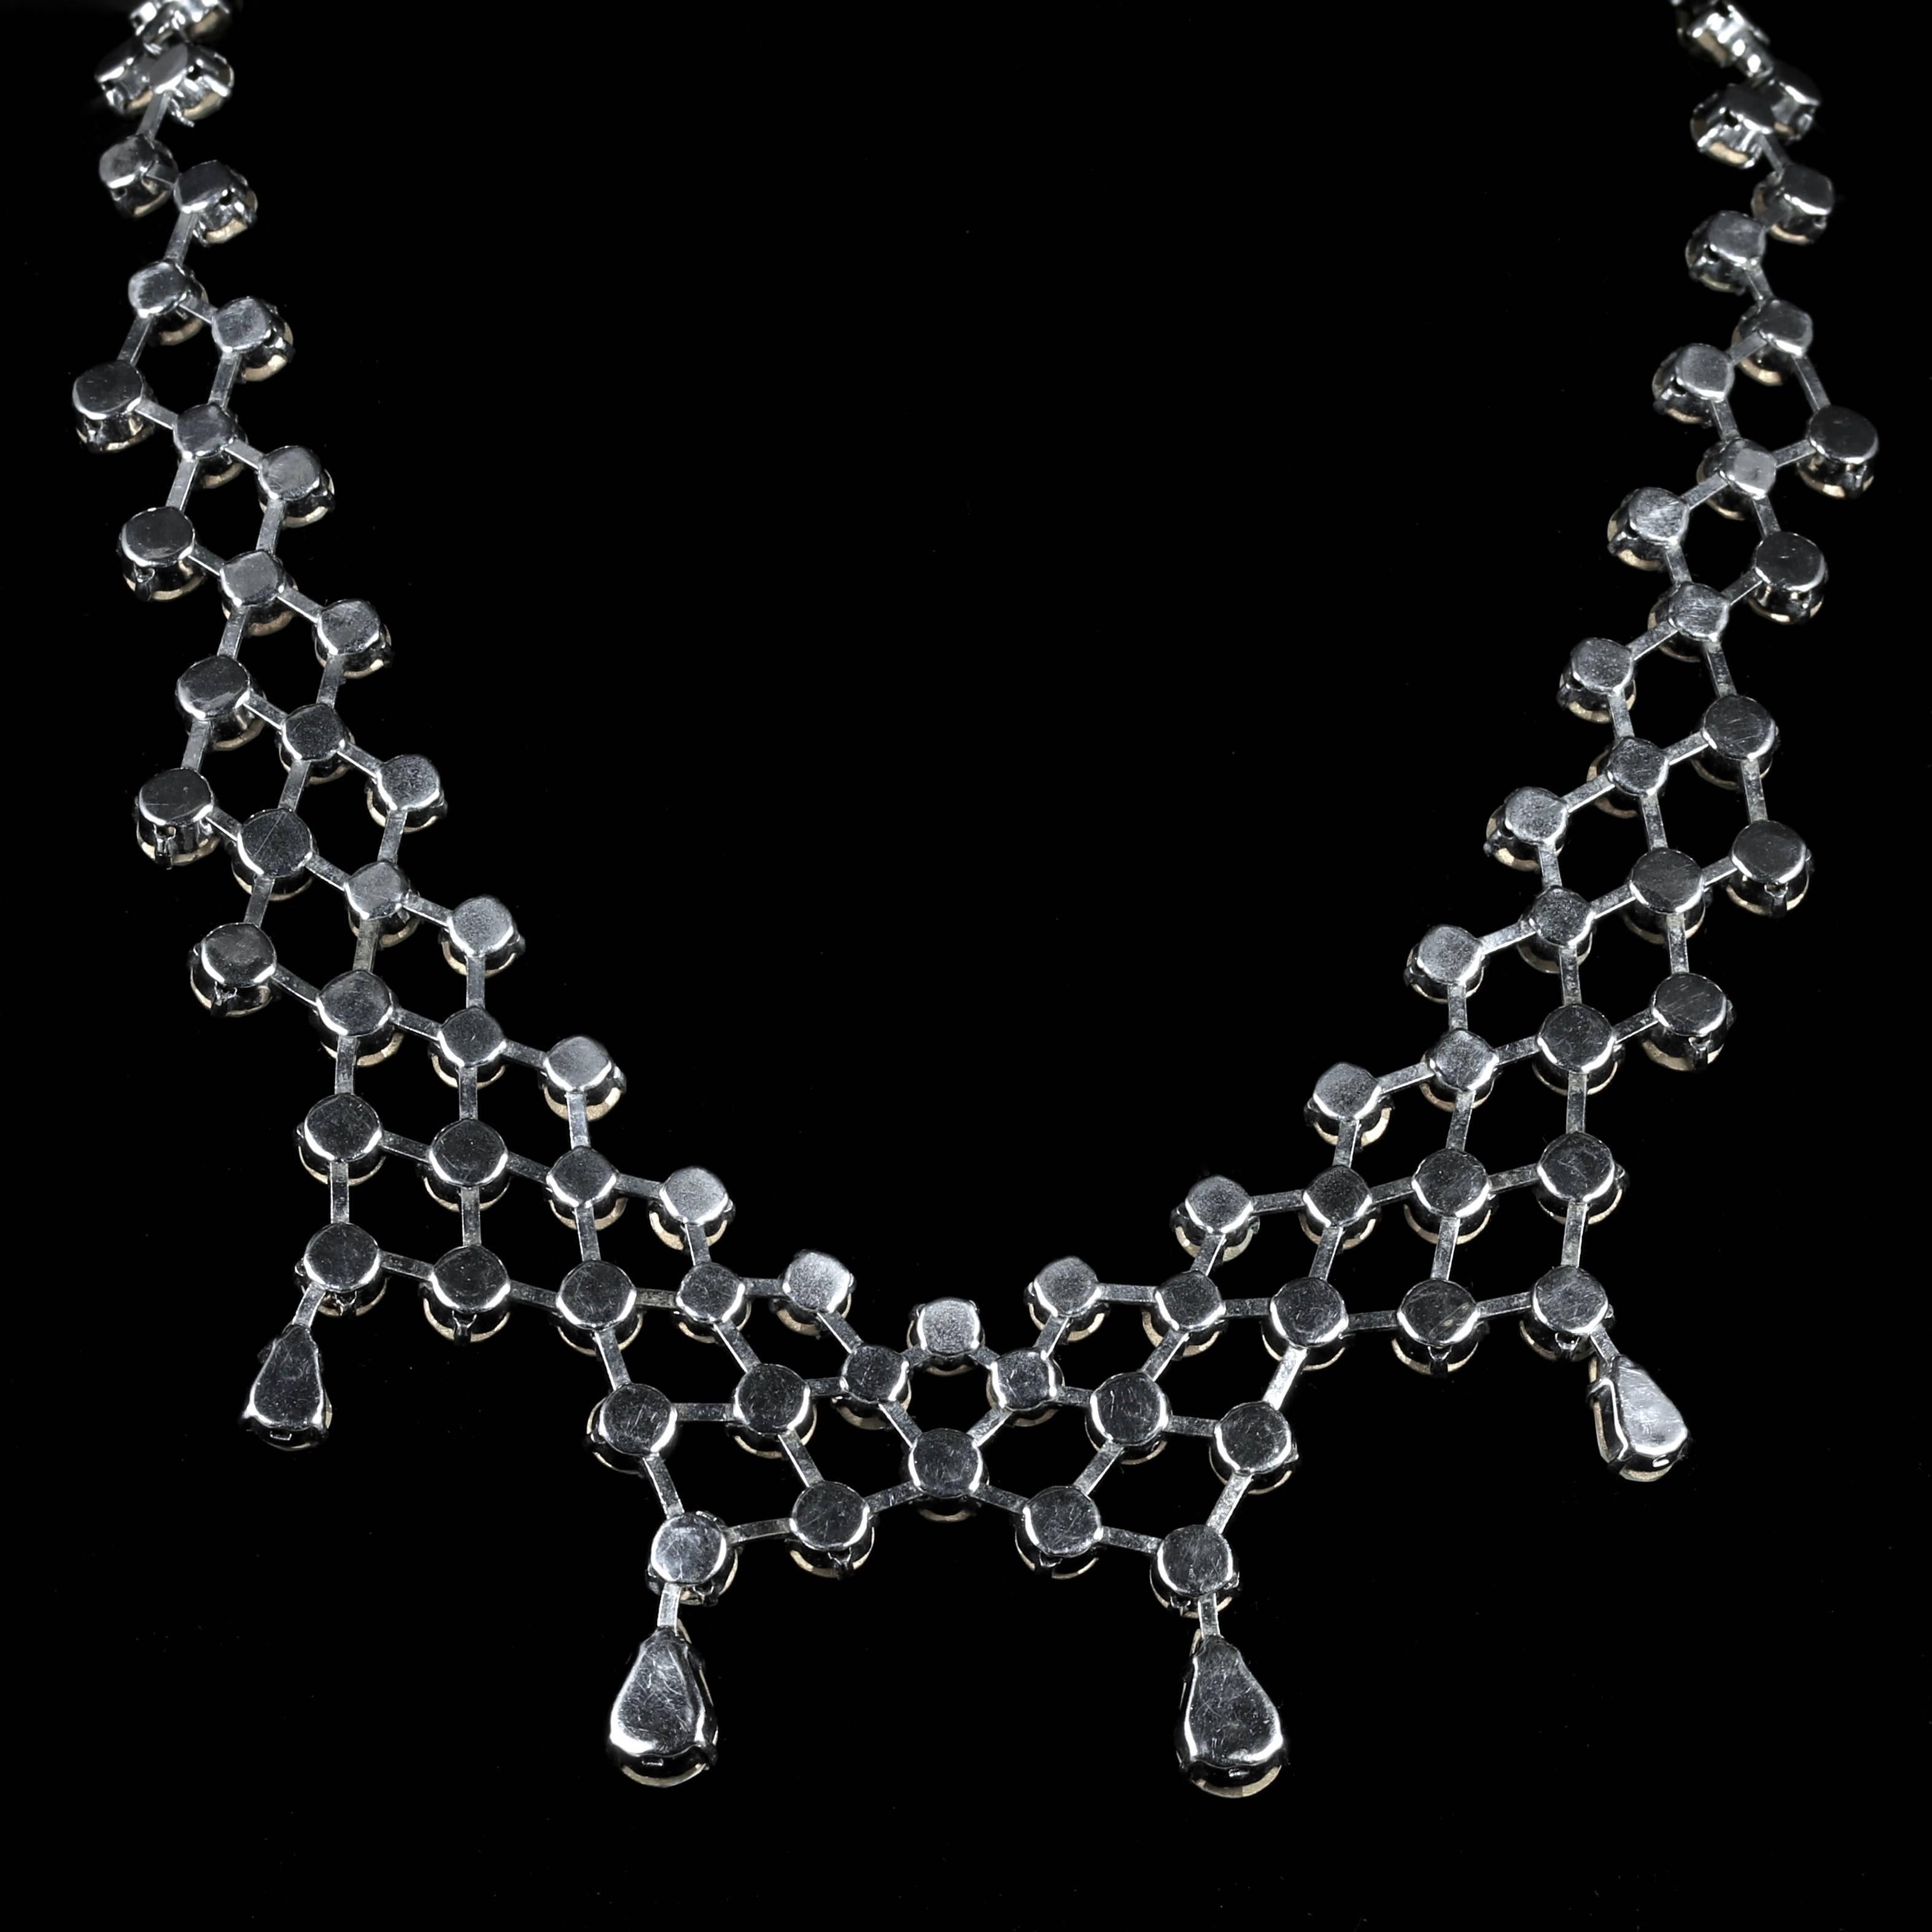 To read more please click continue reading below...

This fabulous 1920's Garland Paste necklace is simply beautiful.

Set with sparkling bright White Paste Stones which adorn the neck when worn.

Paste is a heavy, very transparent flint glass that